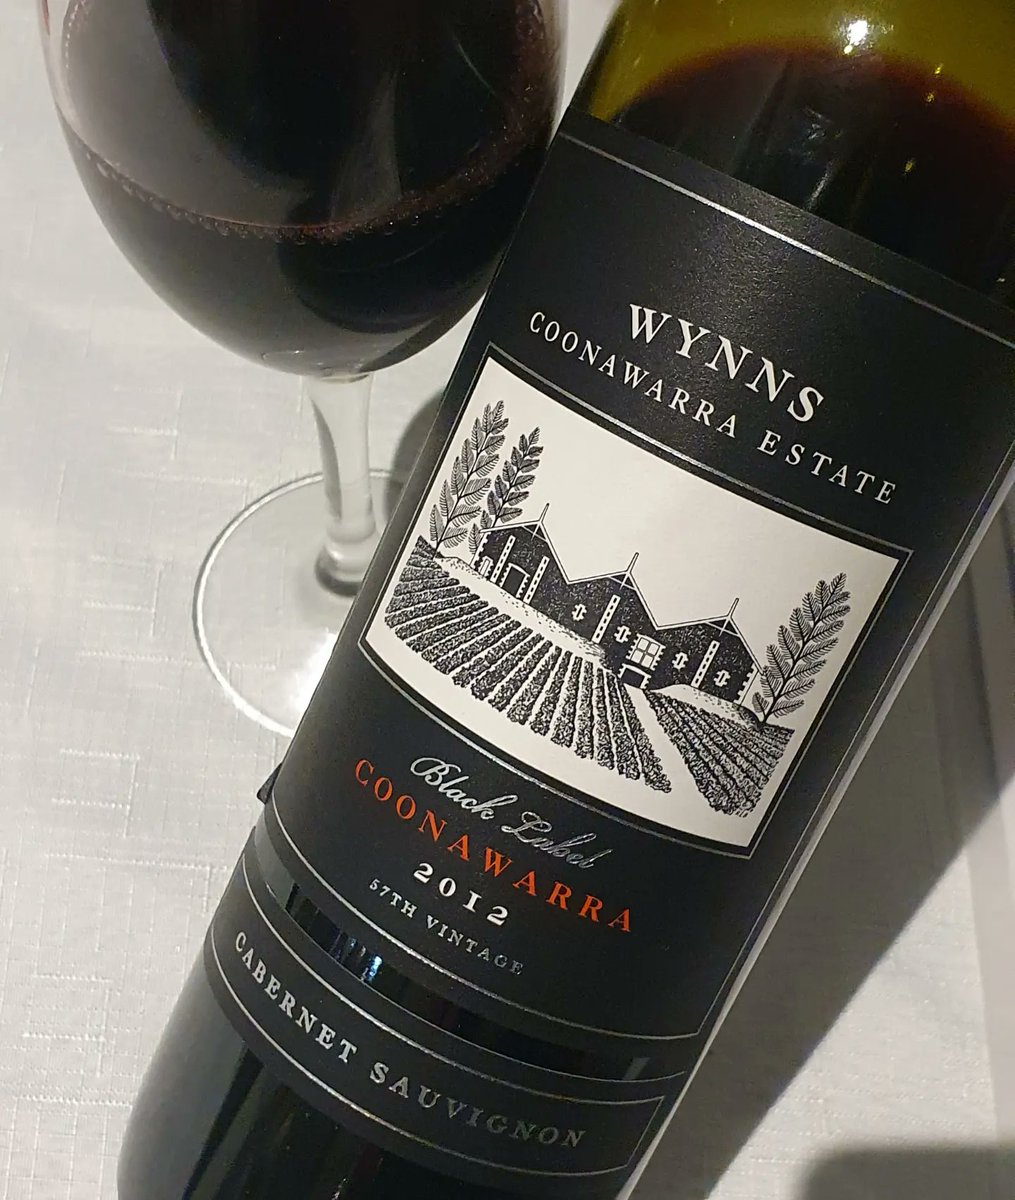 Wynns Coonawarra Black Label Cabernet Sauvignon 2012

Got to be about the best value gear Down Under. Cellars forever and around $30 bucks. Epic.

Drink the good stuff 🍷 Brett

#aussiewinetasting #drinkthegoodstuff #aussiewine #australianwine  @WynnsEstate @CoonawarraWine